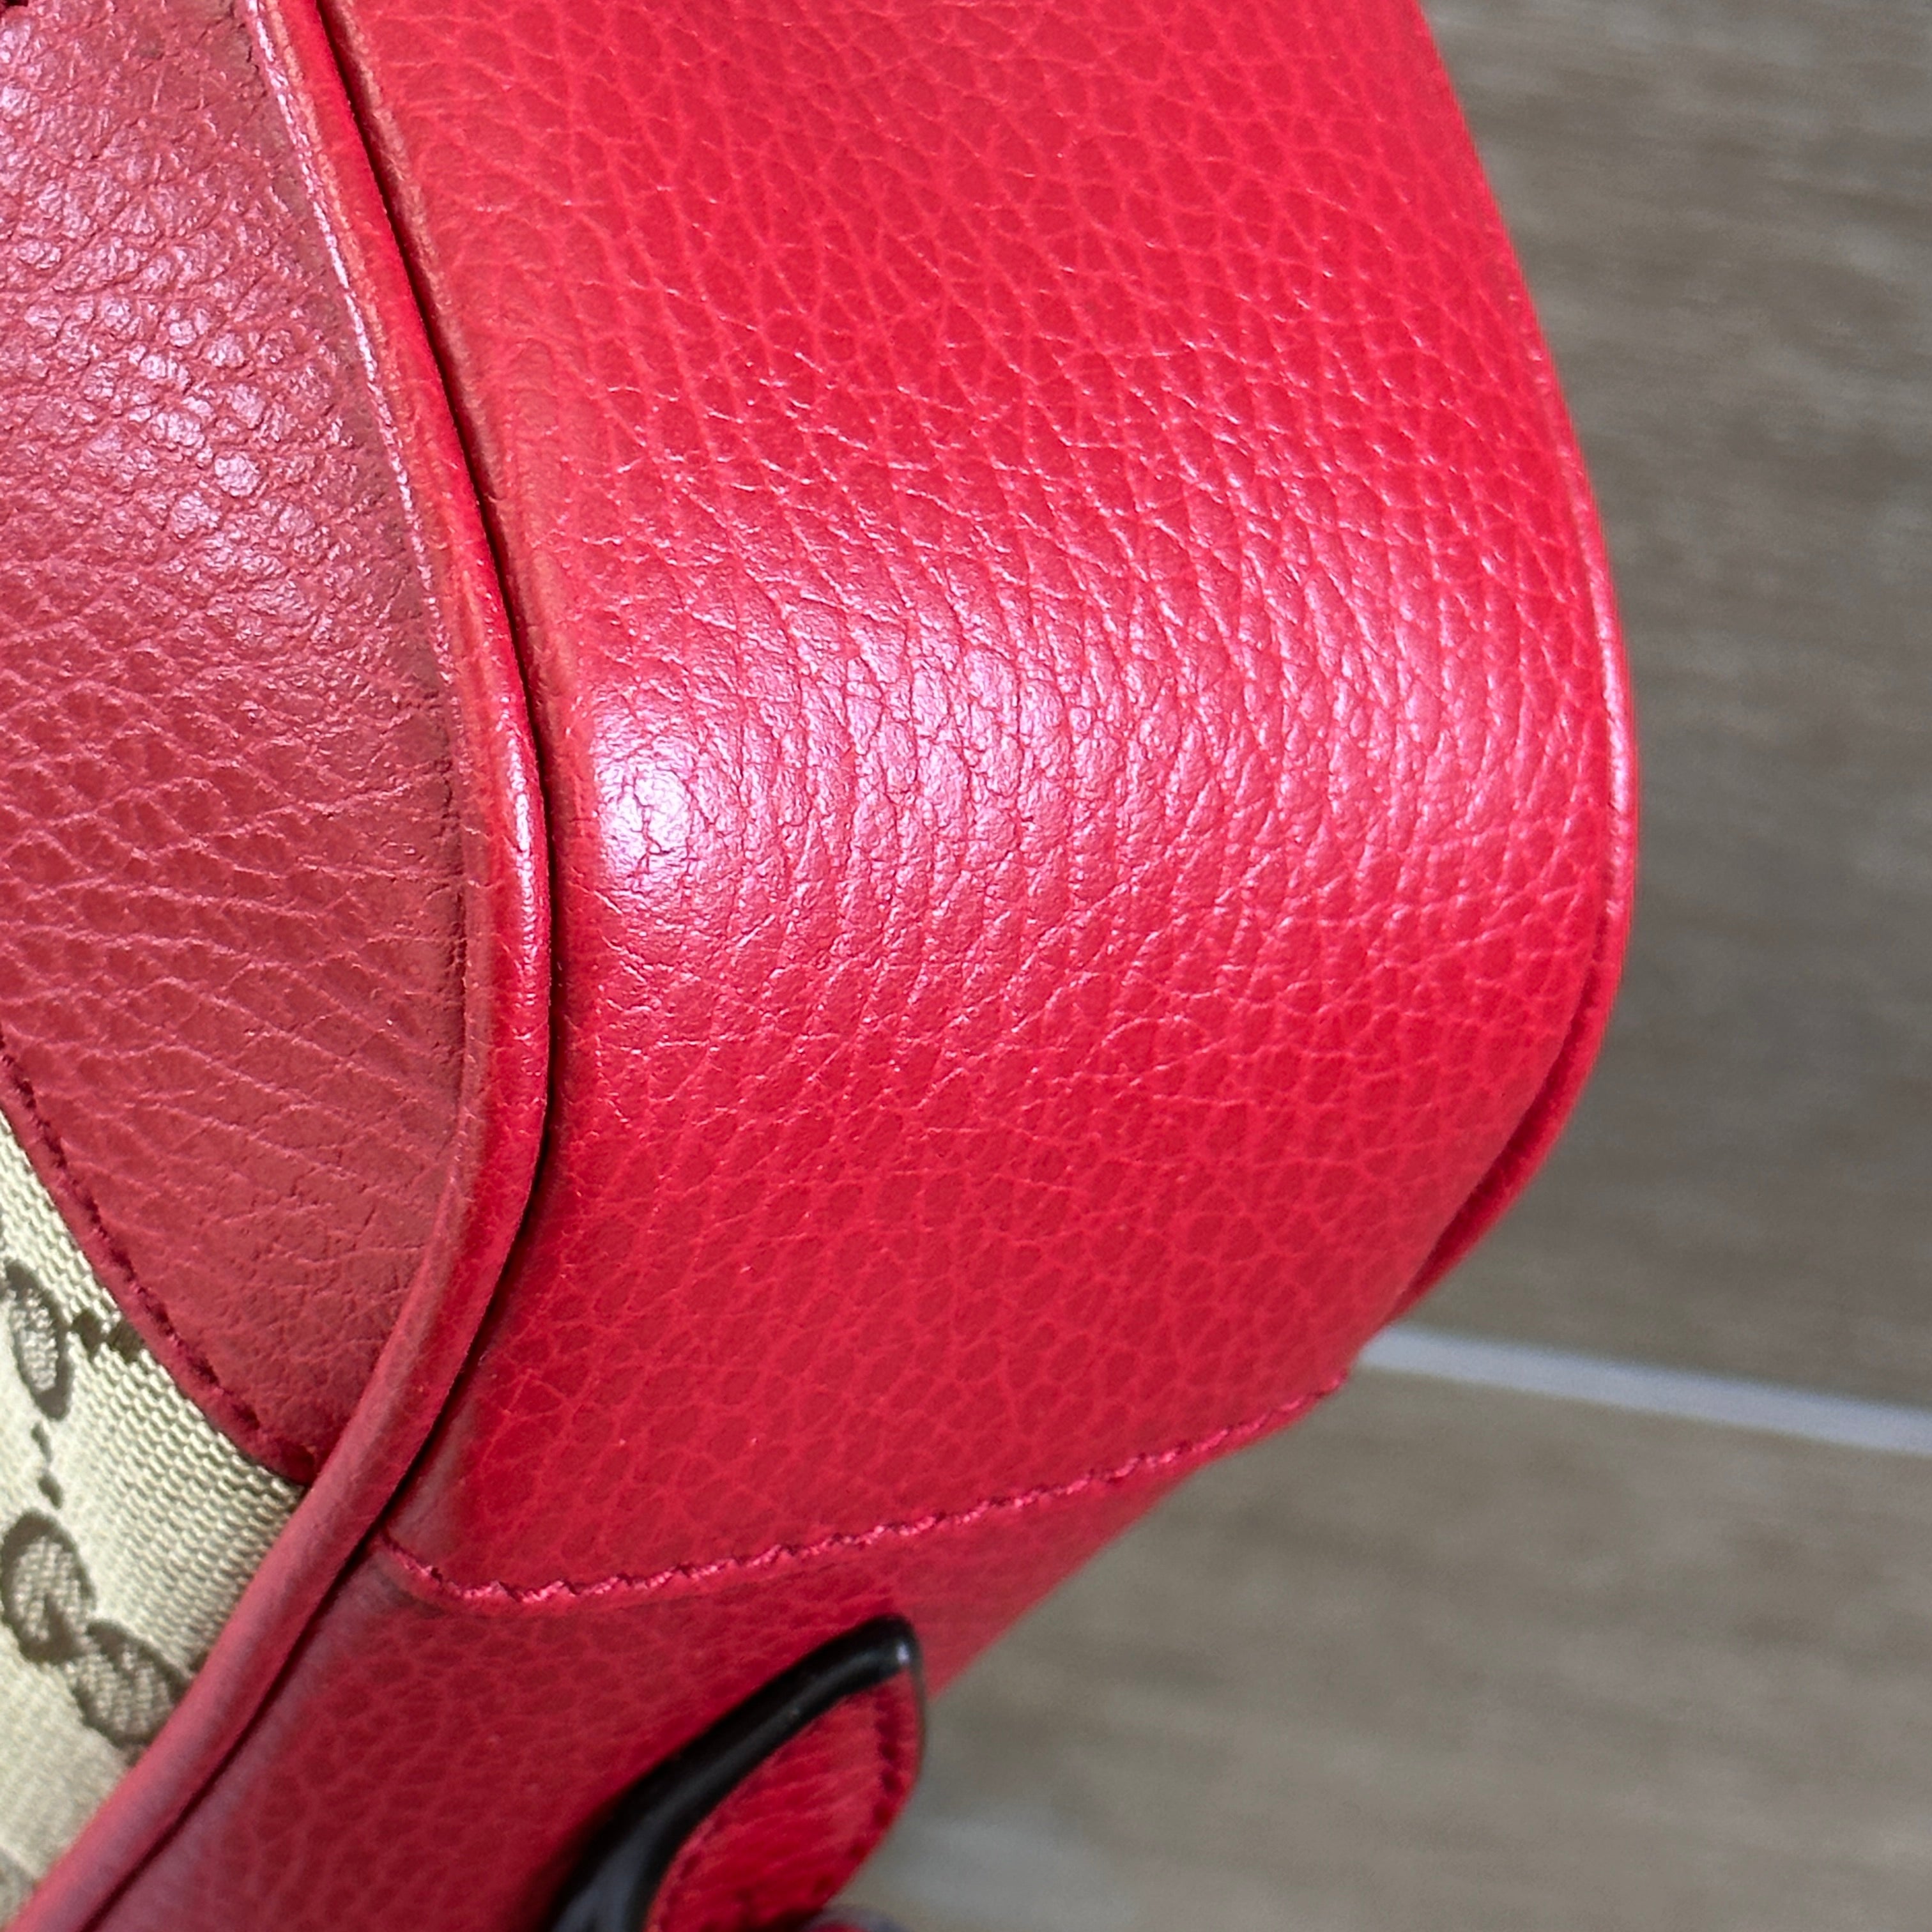 Gucci Bree Crossbody GG Red Leather – Chicago Pawners & Jewelers